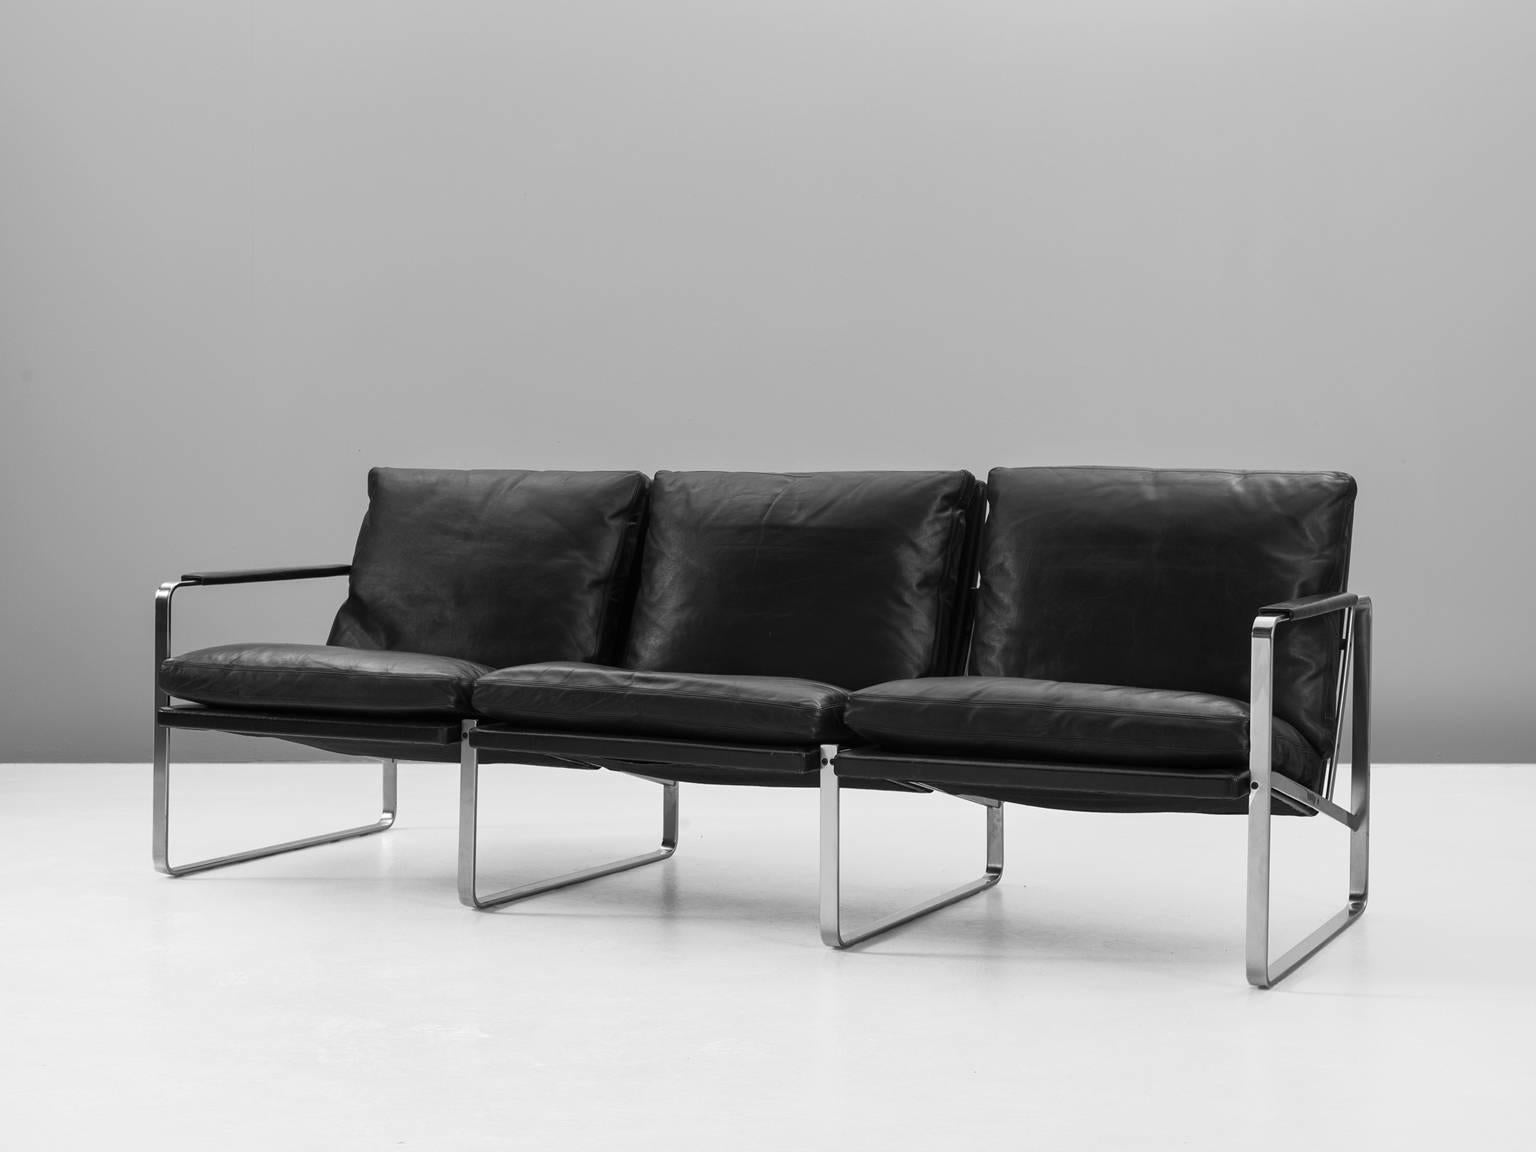 Preben Fabricius for Walter Knoll, three-seat sofa, black leather and steel, 1970s.

This very beautiful black sofa with four square steel base's is very comfortable. The soft black leather cushions provide the back with excellent support and it's